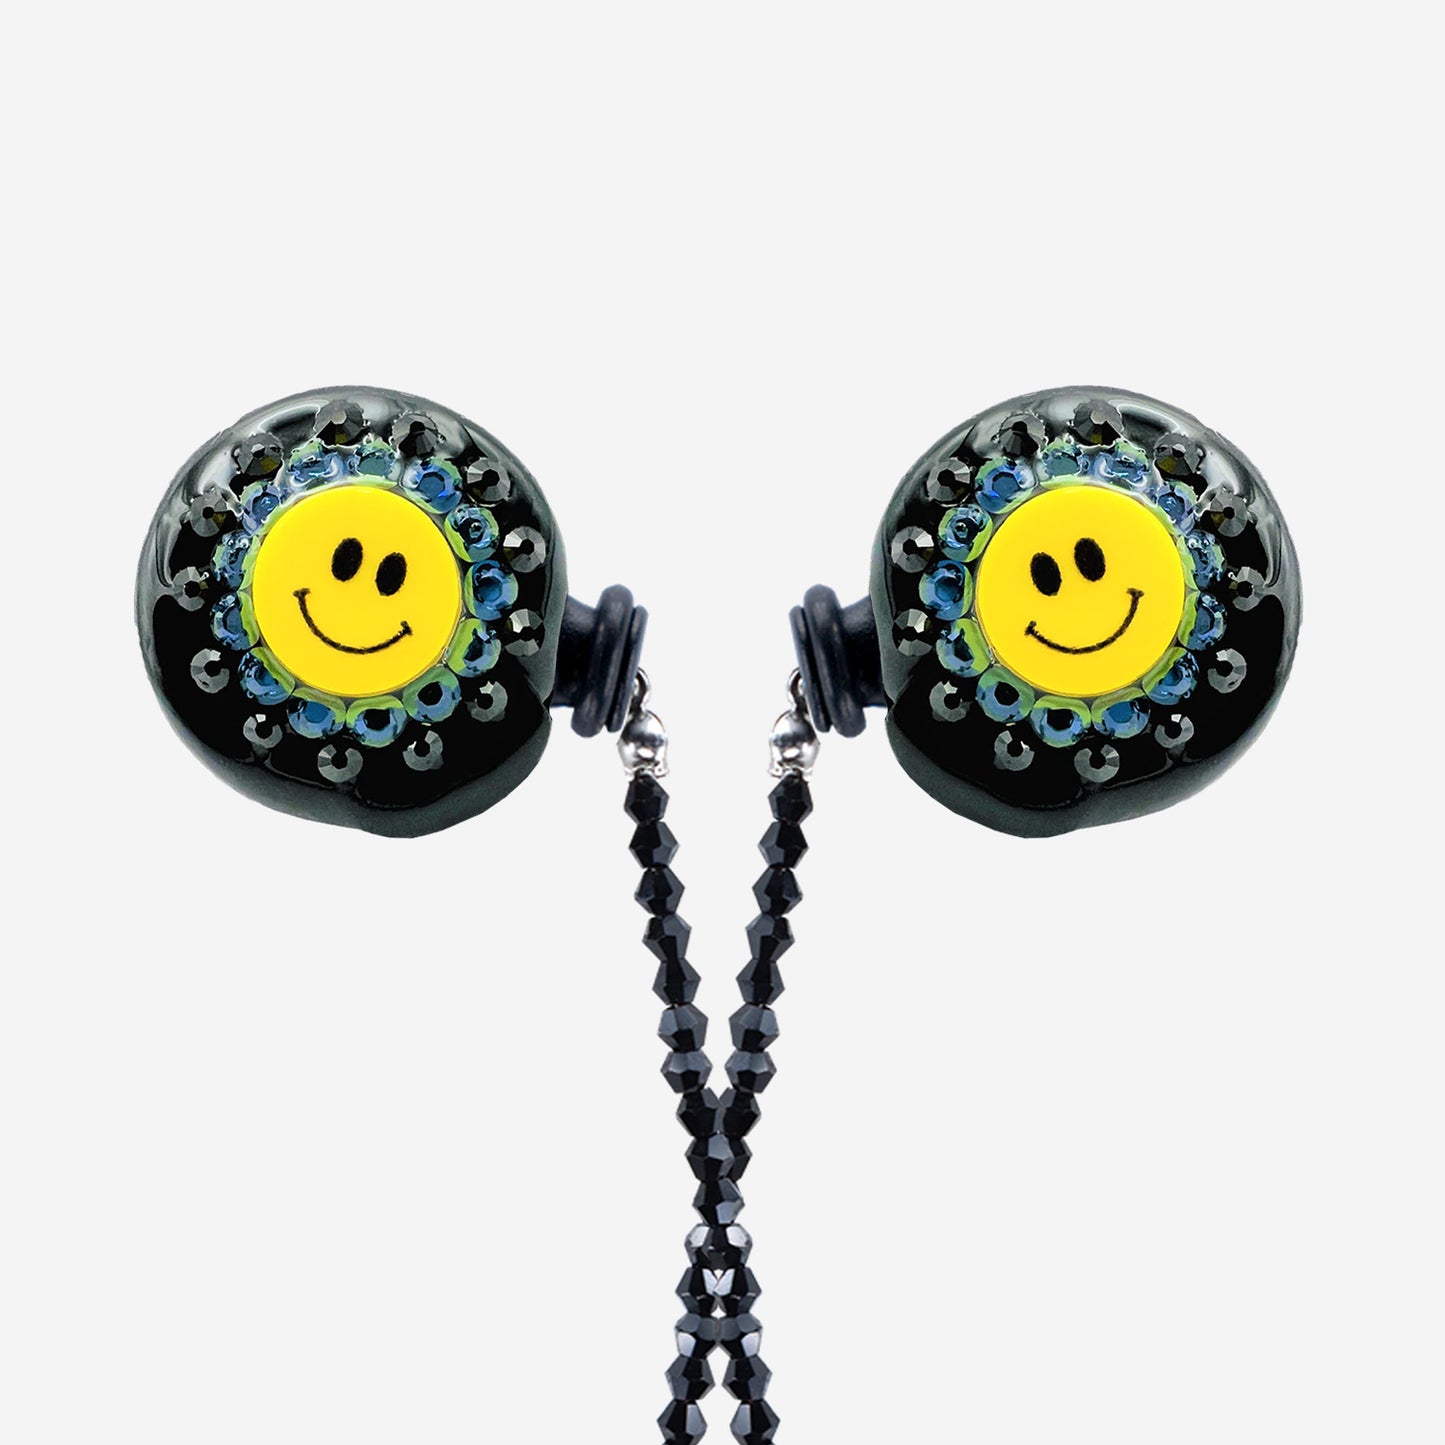 The Smiley Earbud Drop